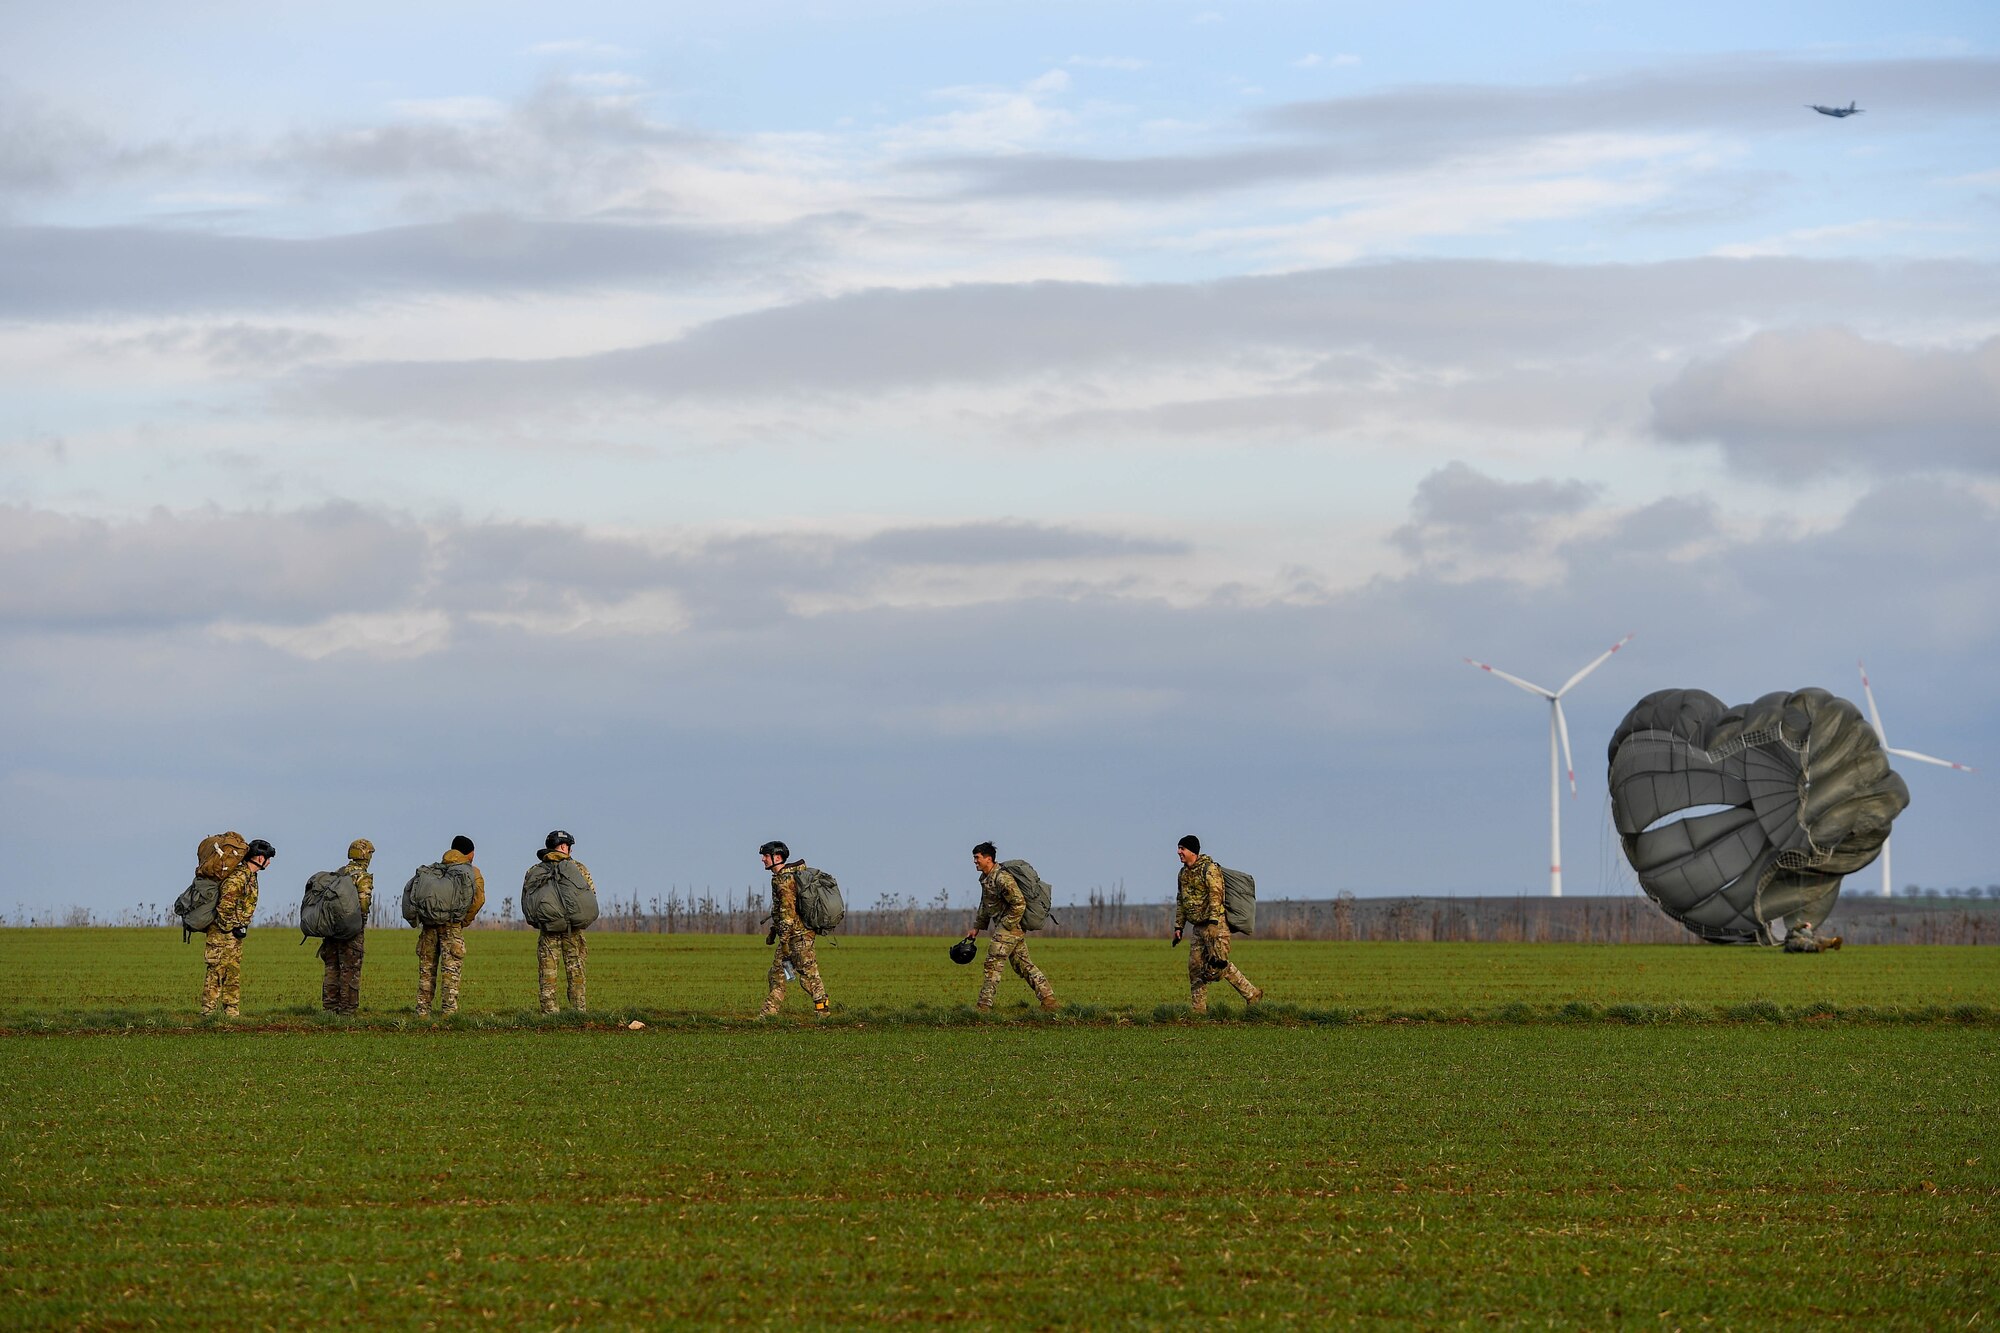 U.S. Air Force paratroopers with the 435th Contingency Response Group, based at Ramstein Air Base, Germany, gather together after their jump into the Alzey Drop Zone in Ober-Flörsheim, Germany, Jan. 20, 2023.